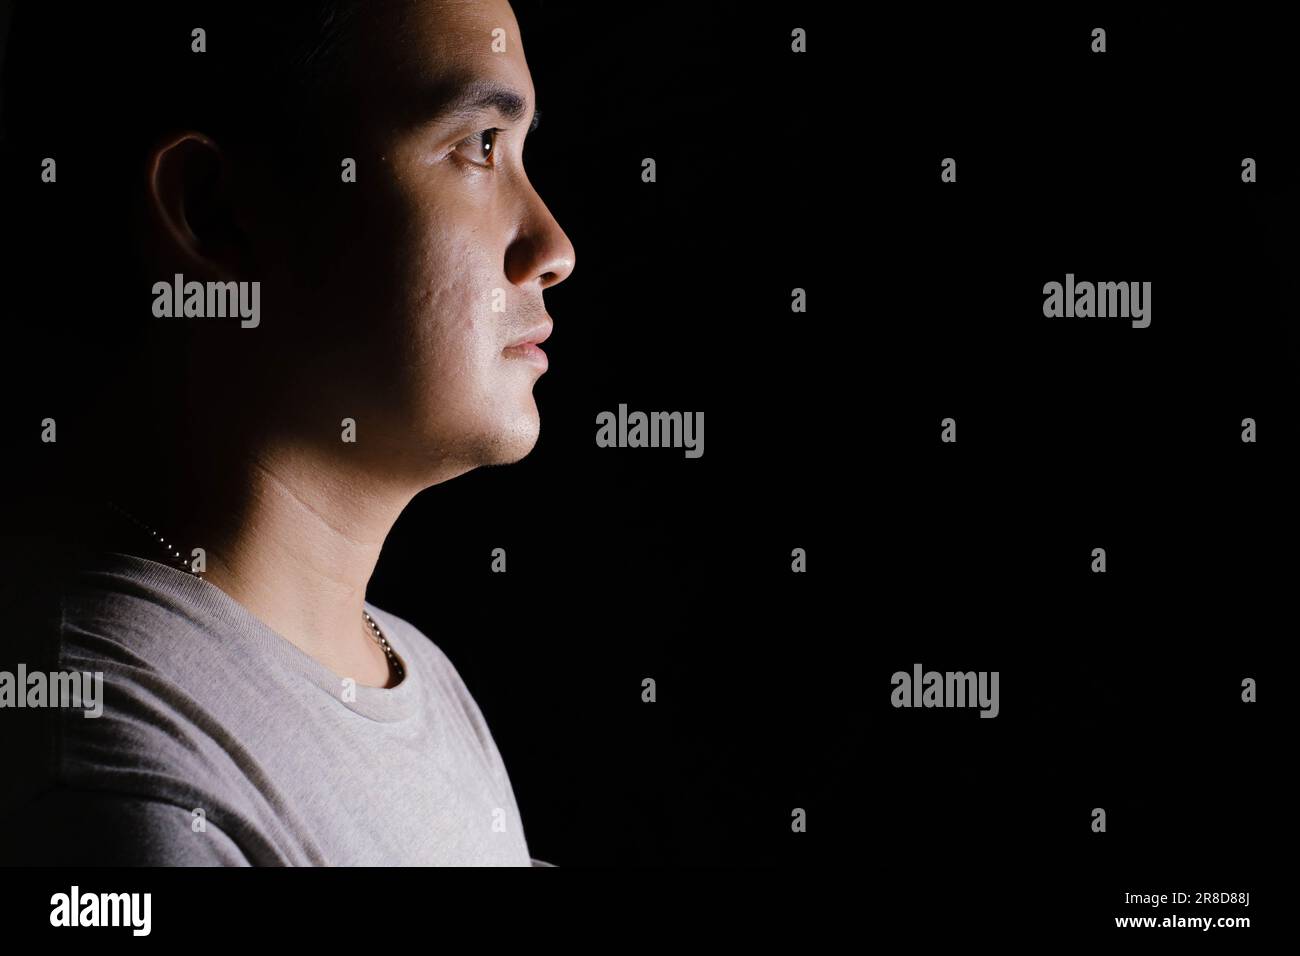 Low key and close-up shot of a young Asian man looking forward to the right side of the camera. Isolated black background. Dramatic. Stock Photo